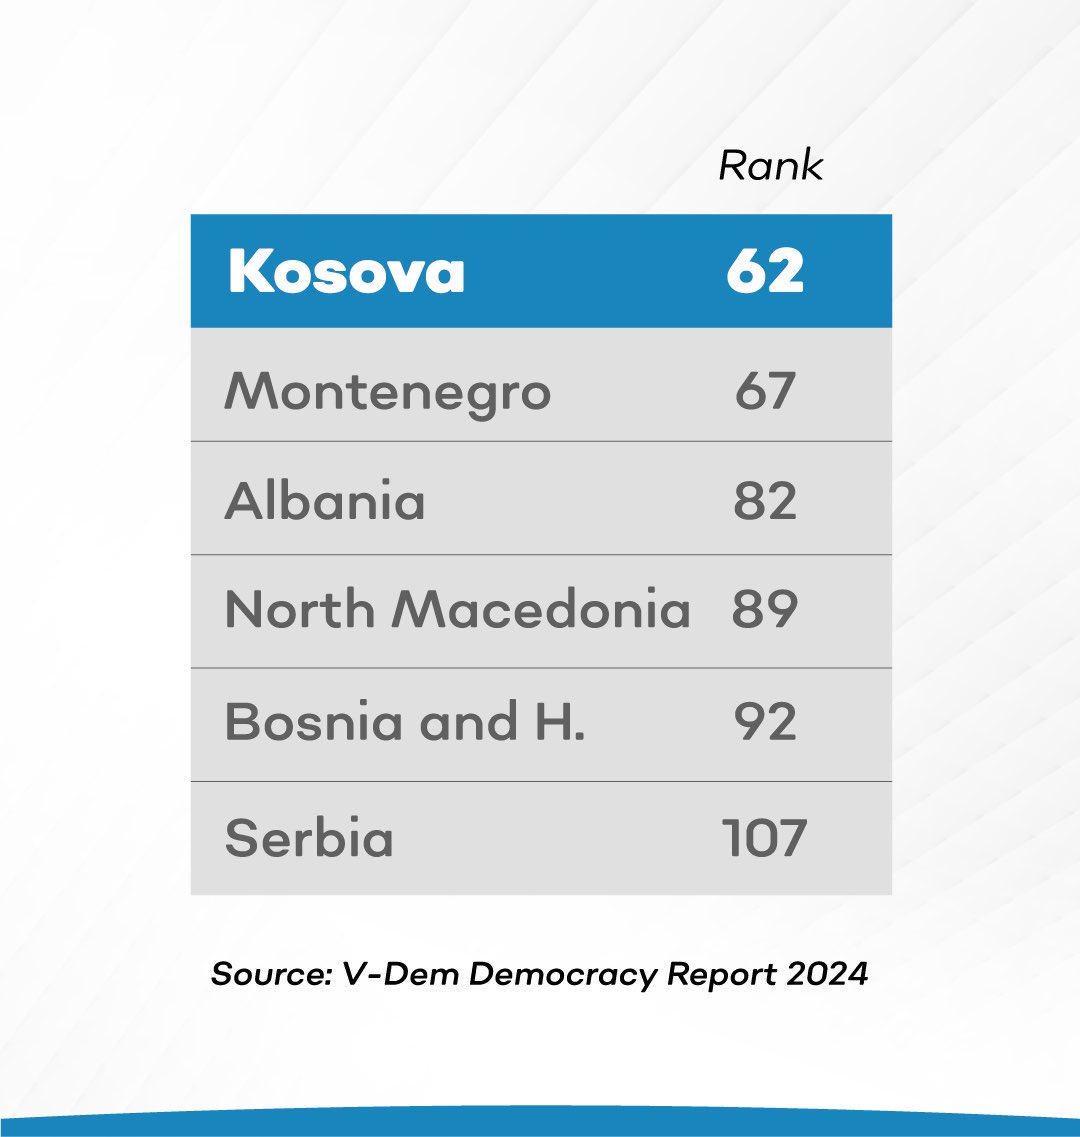 The 2024 report by the Swedish-based @vdeminstitute has positioned Kosova in an improved stance, highlighting it as one of the few democracies globally showing enhancement. At 62, Kosova ranks higher than all WB6 countries.

Aiming higher and higher. #kosova